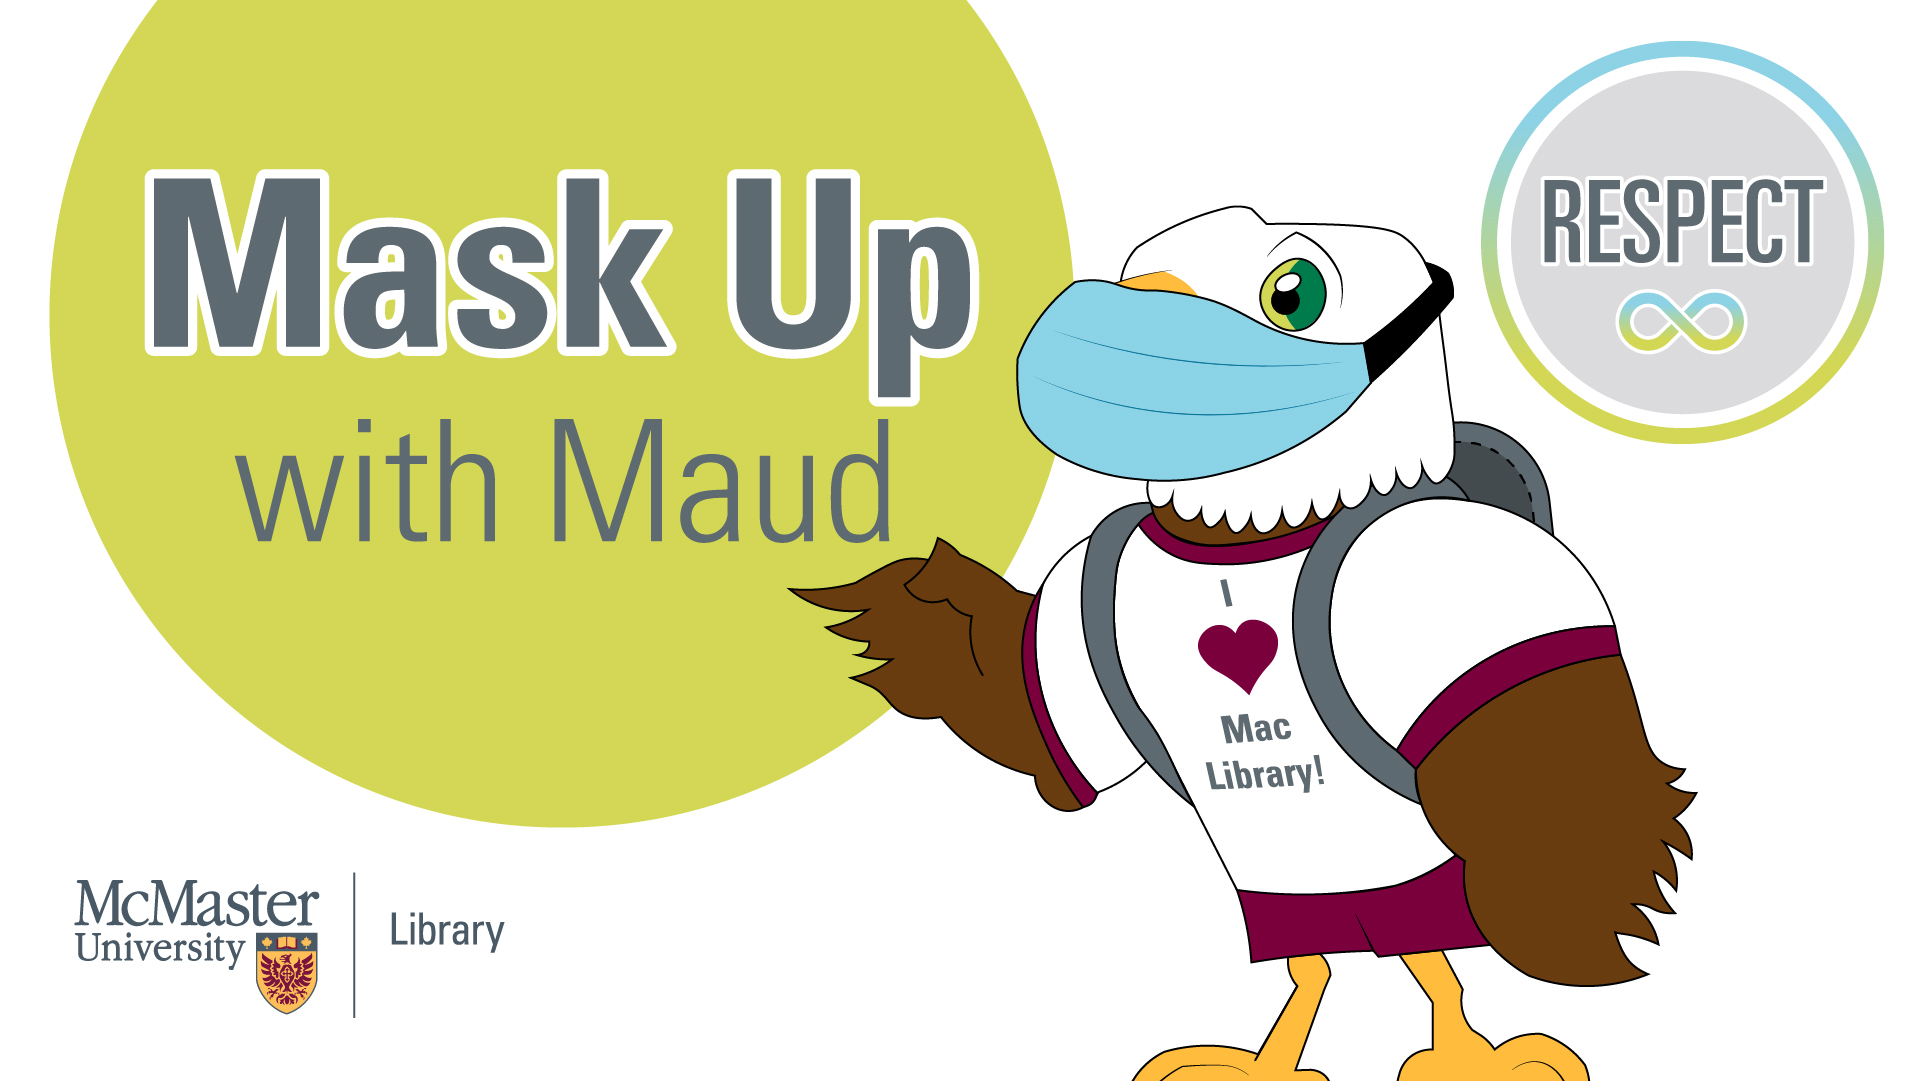 Maud the Library Mascot standing in front of a green circle which reads "Mask Up with Maud", and a grey circle saying "Respect".